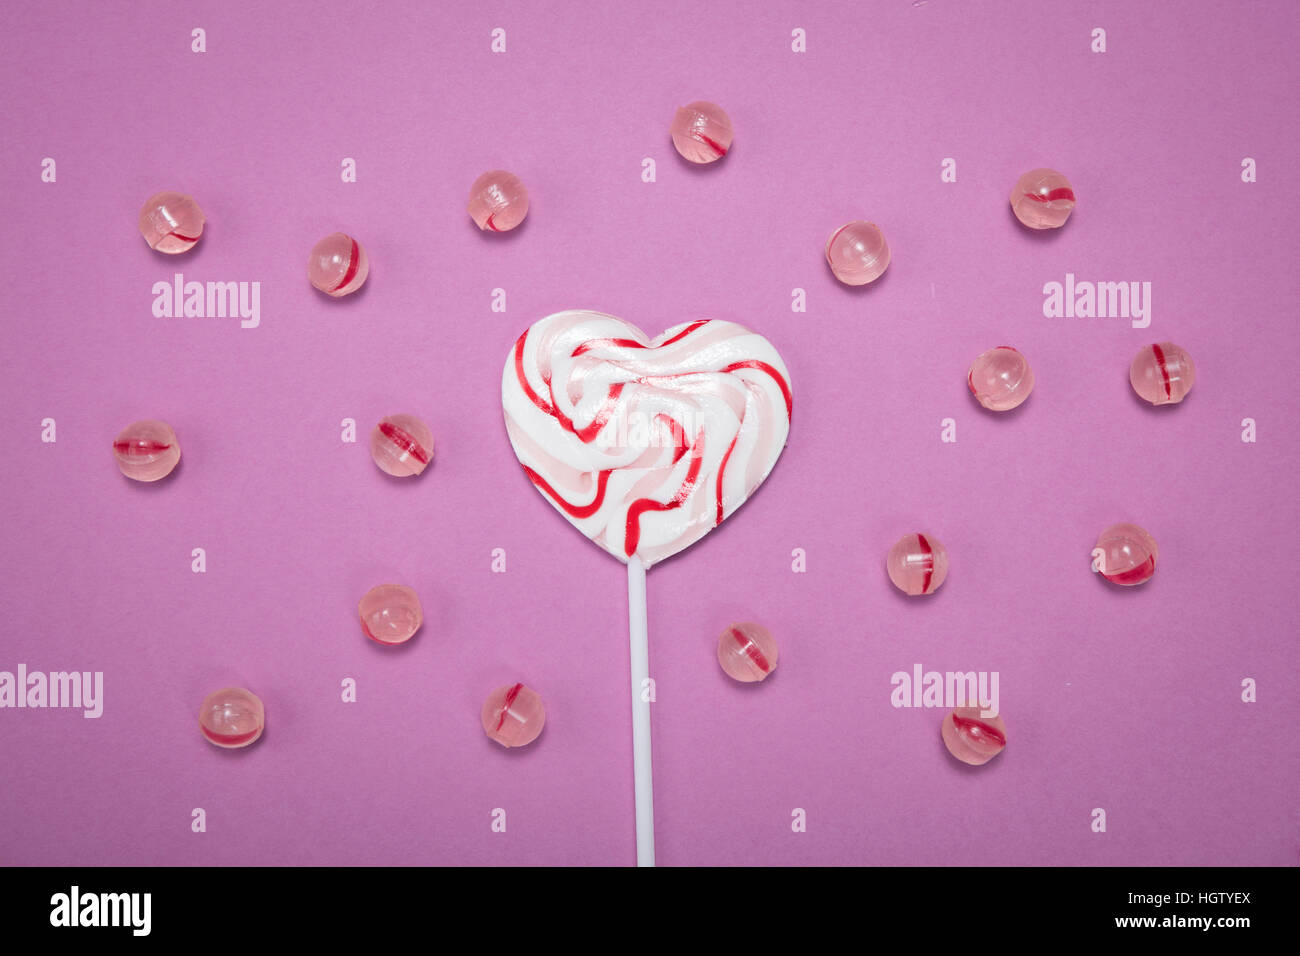 Lollipop and sweet candies Stock Photo - Alamy